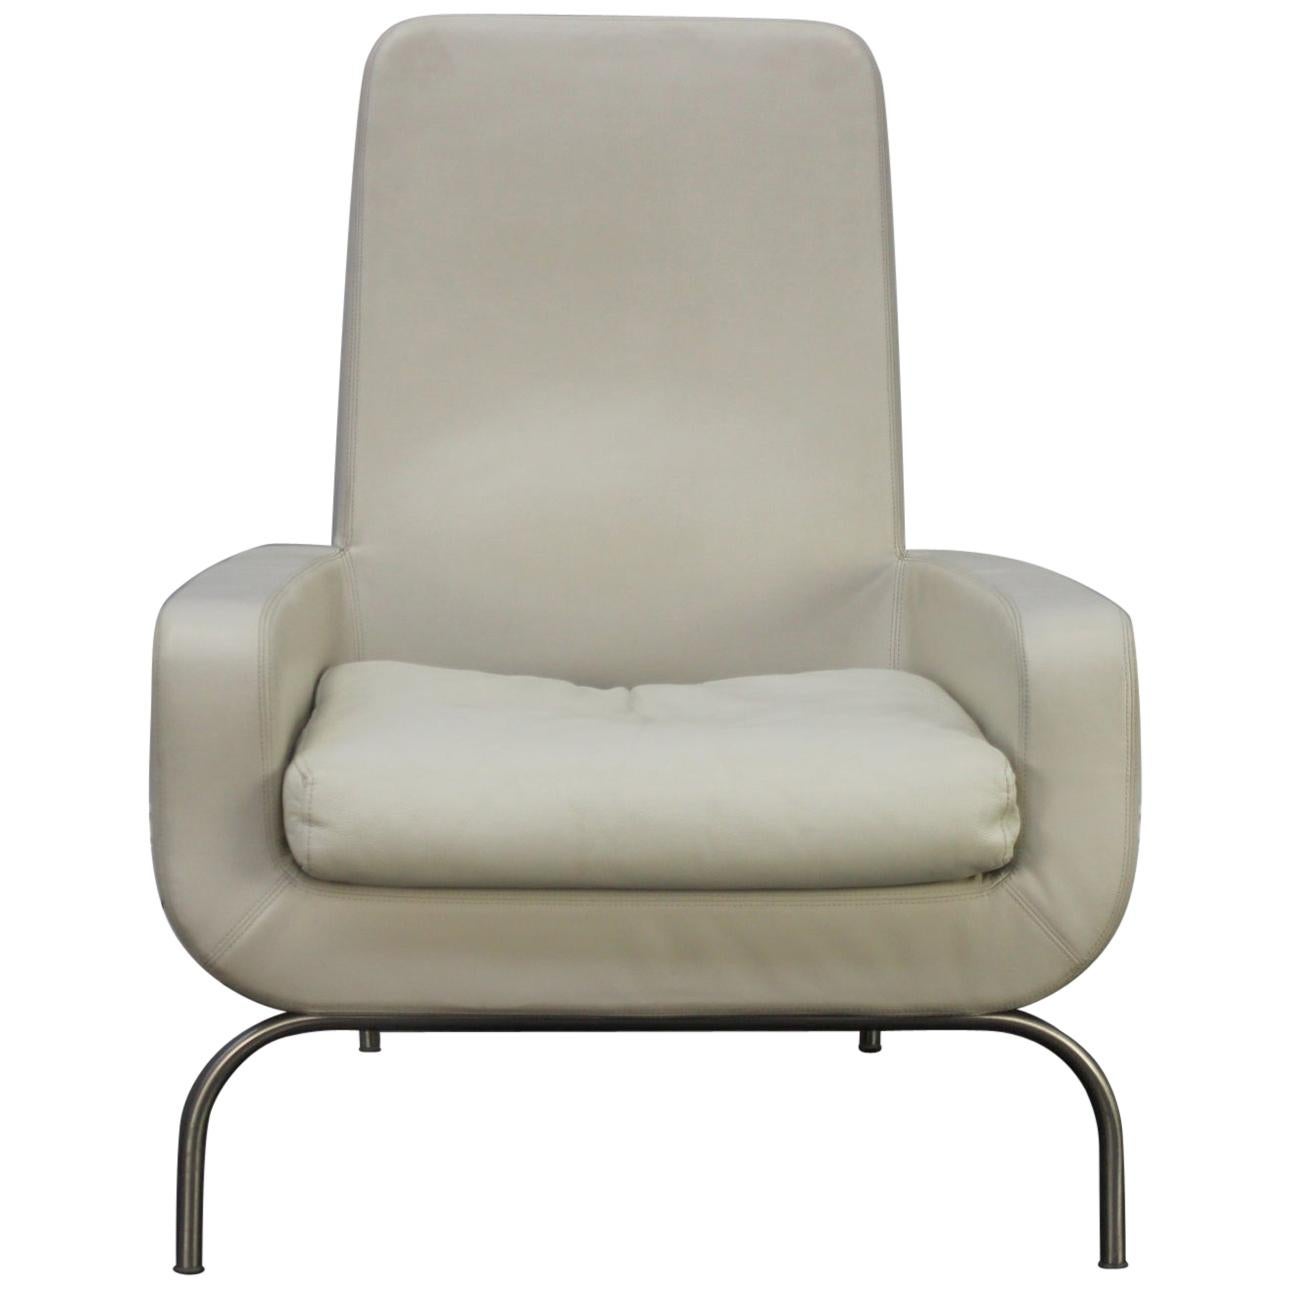 Minotti “Dubuffet” Armchair in Ivory Leather by Rodolfo Dordoni